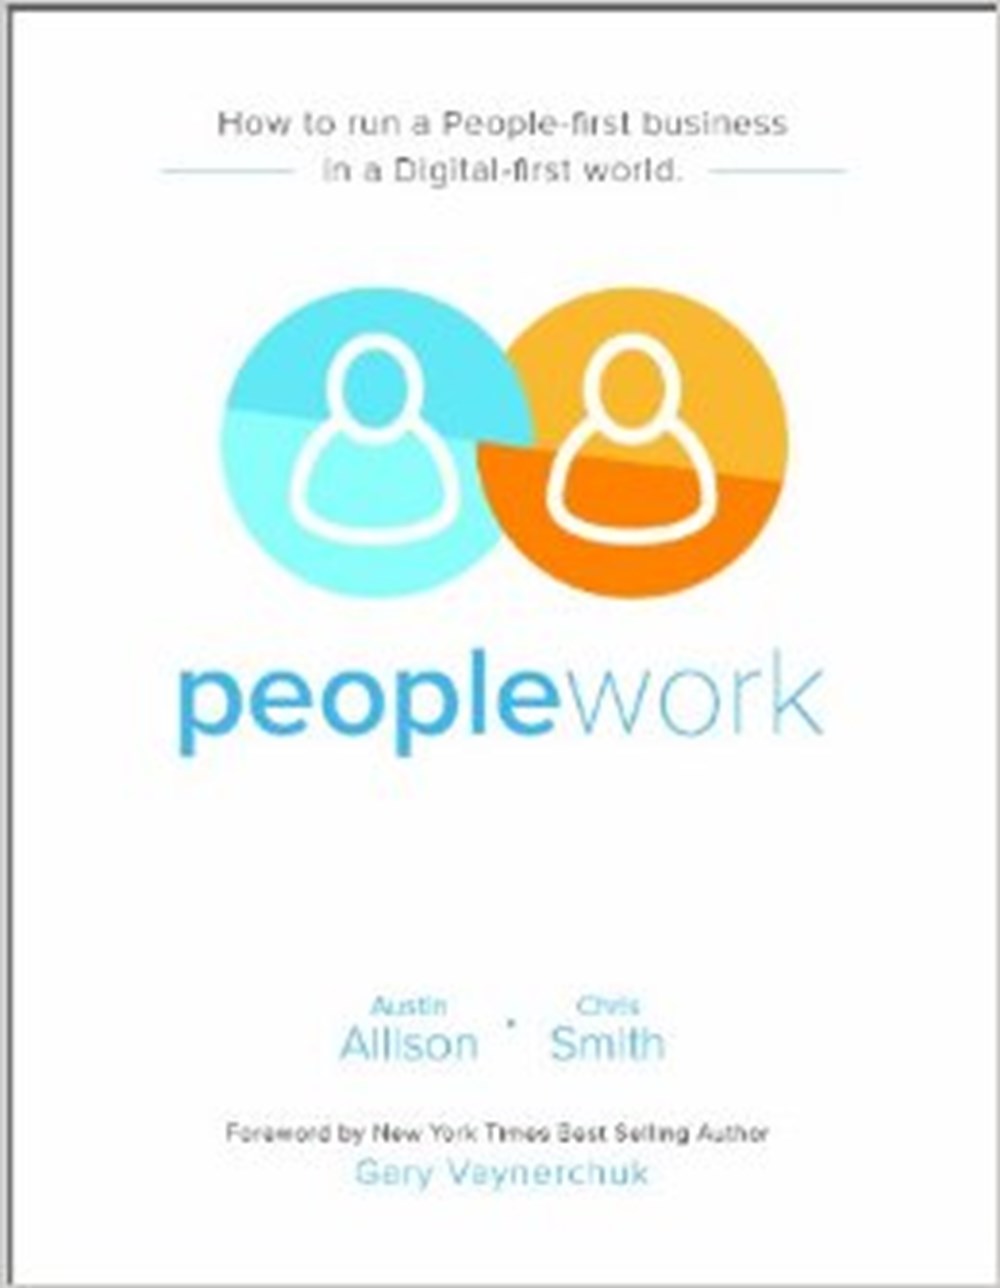 Peoplework How to Run a People-first Business in a Digital-first World